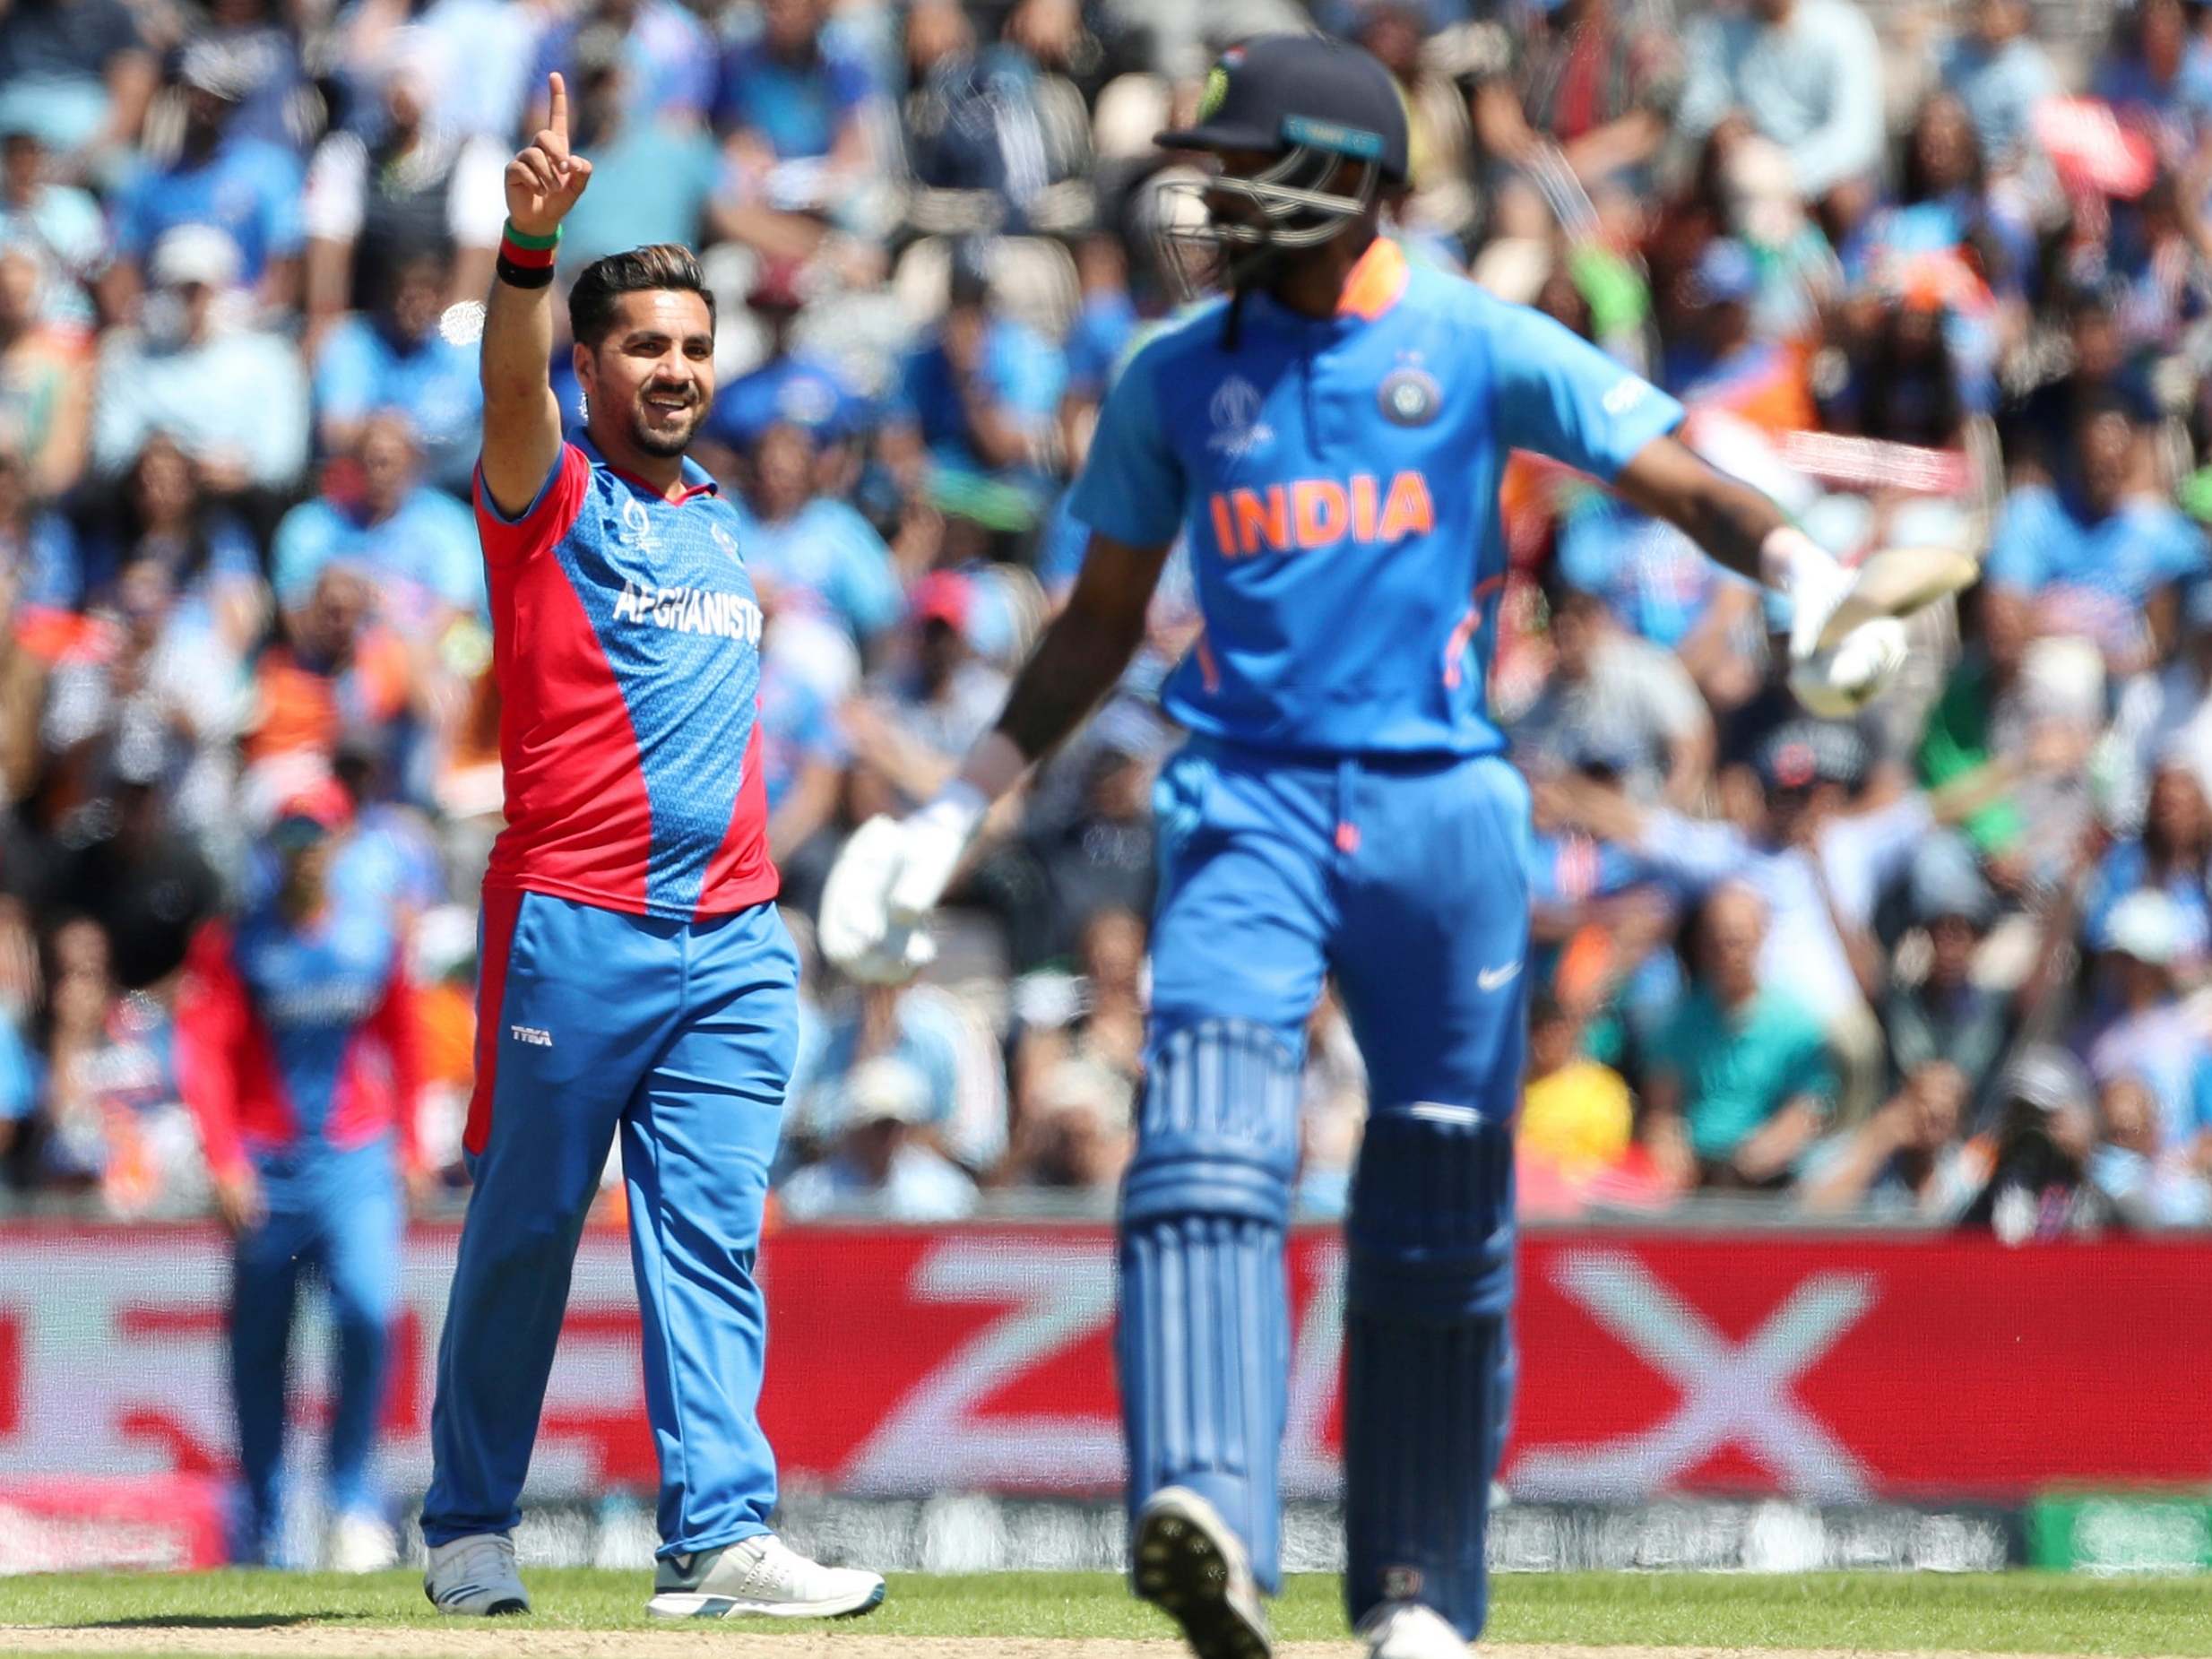 India vs Afghanistan LIVE Cricket World Cup 2019 Latest updates, score